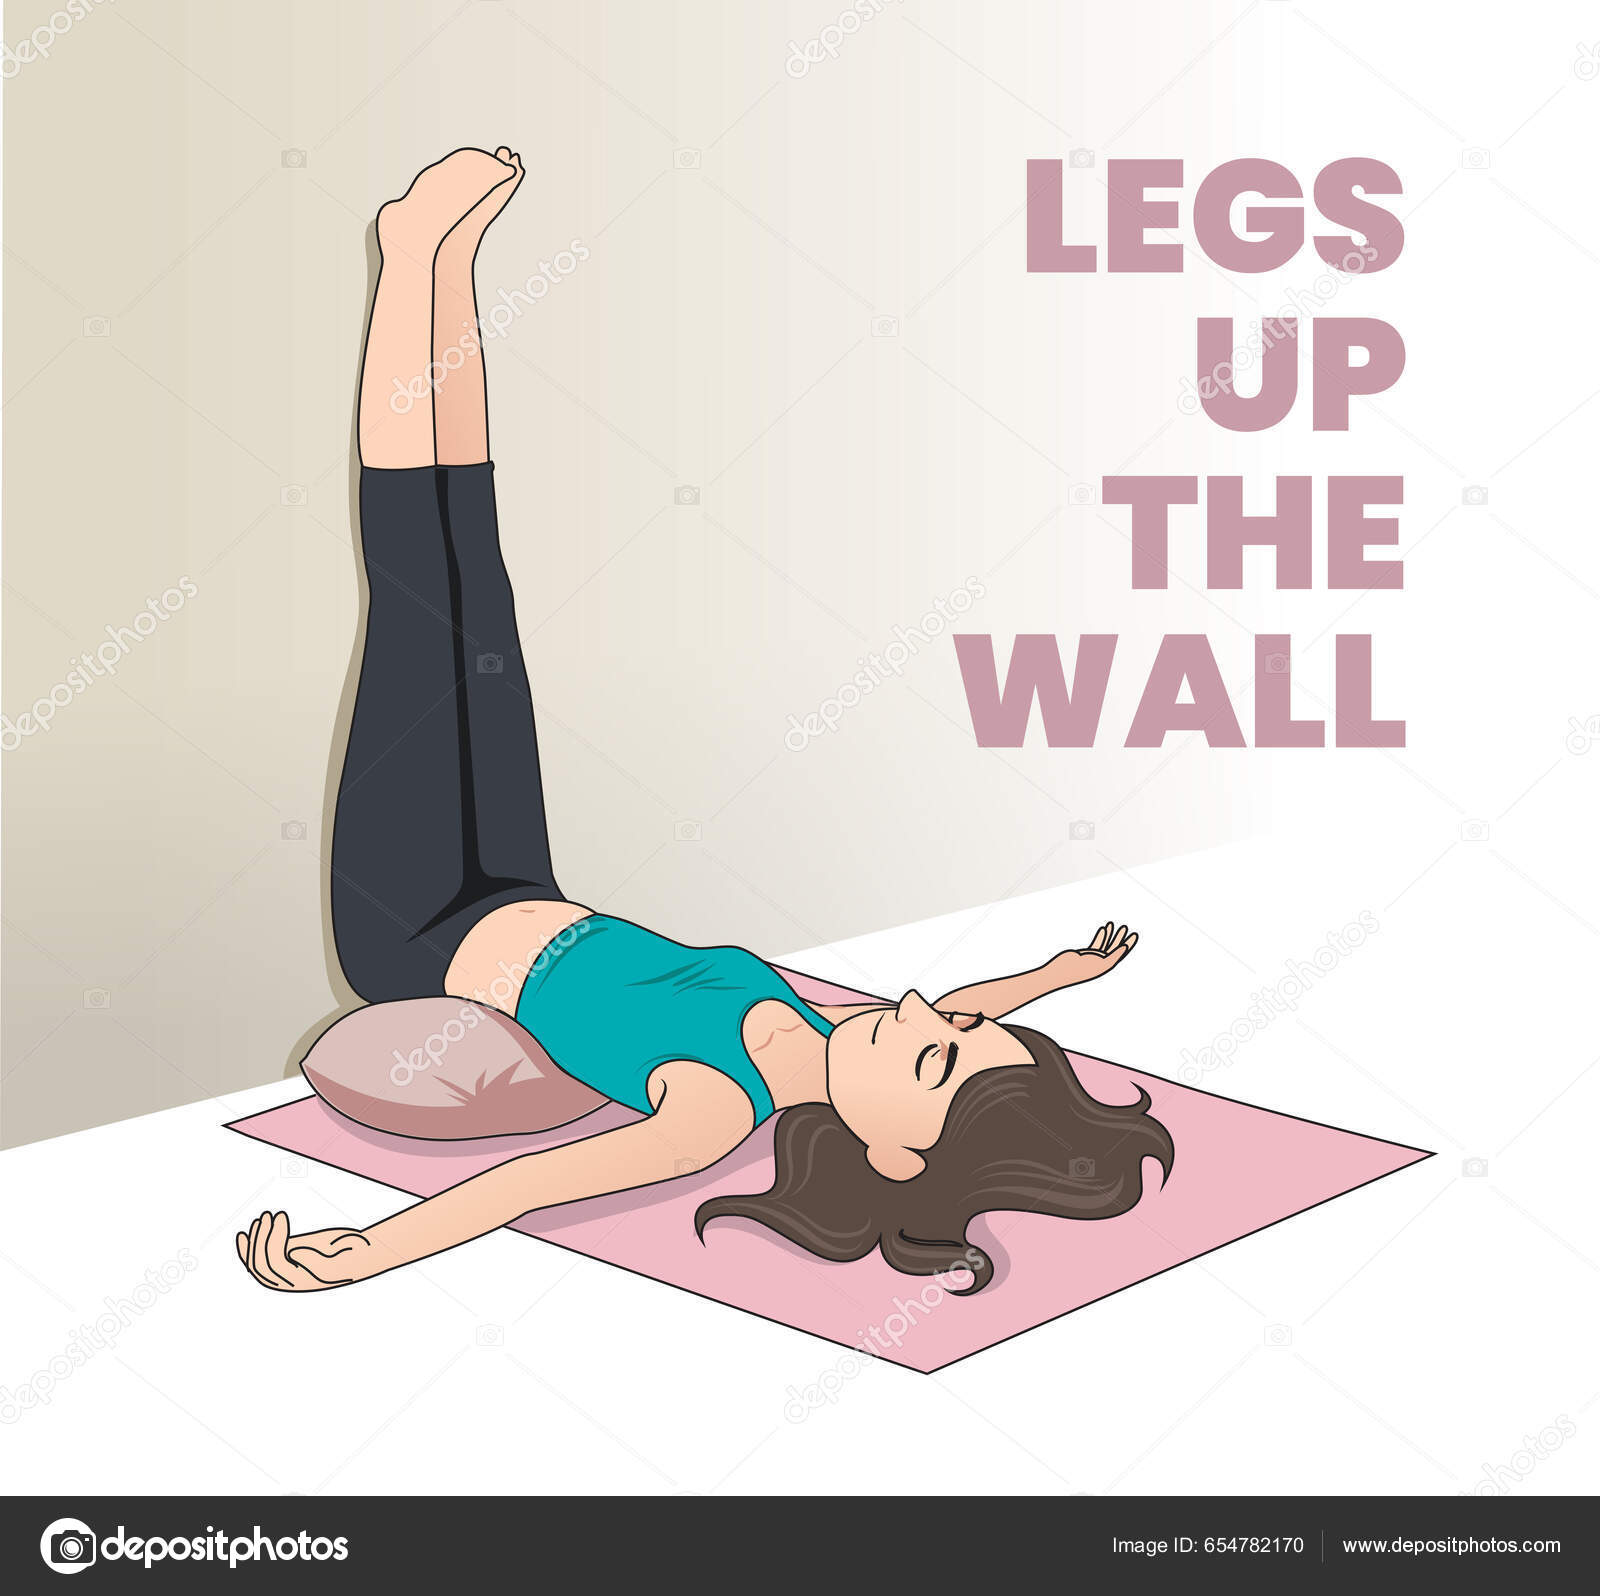 22 Cues for Legs Up the Wall You Probably Haven't Heard